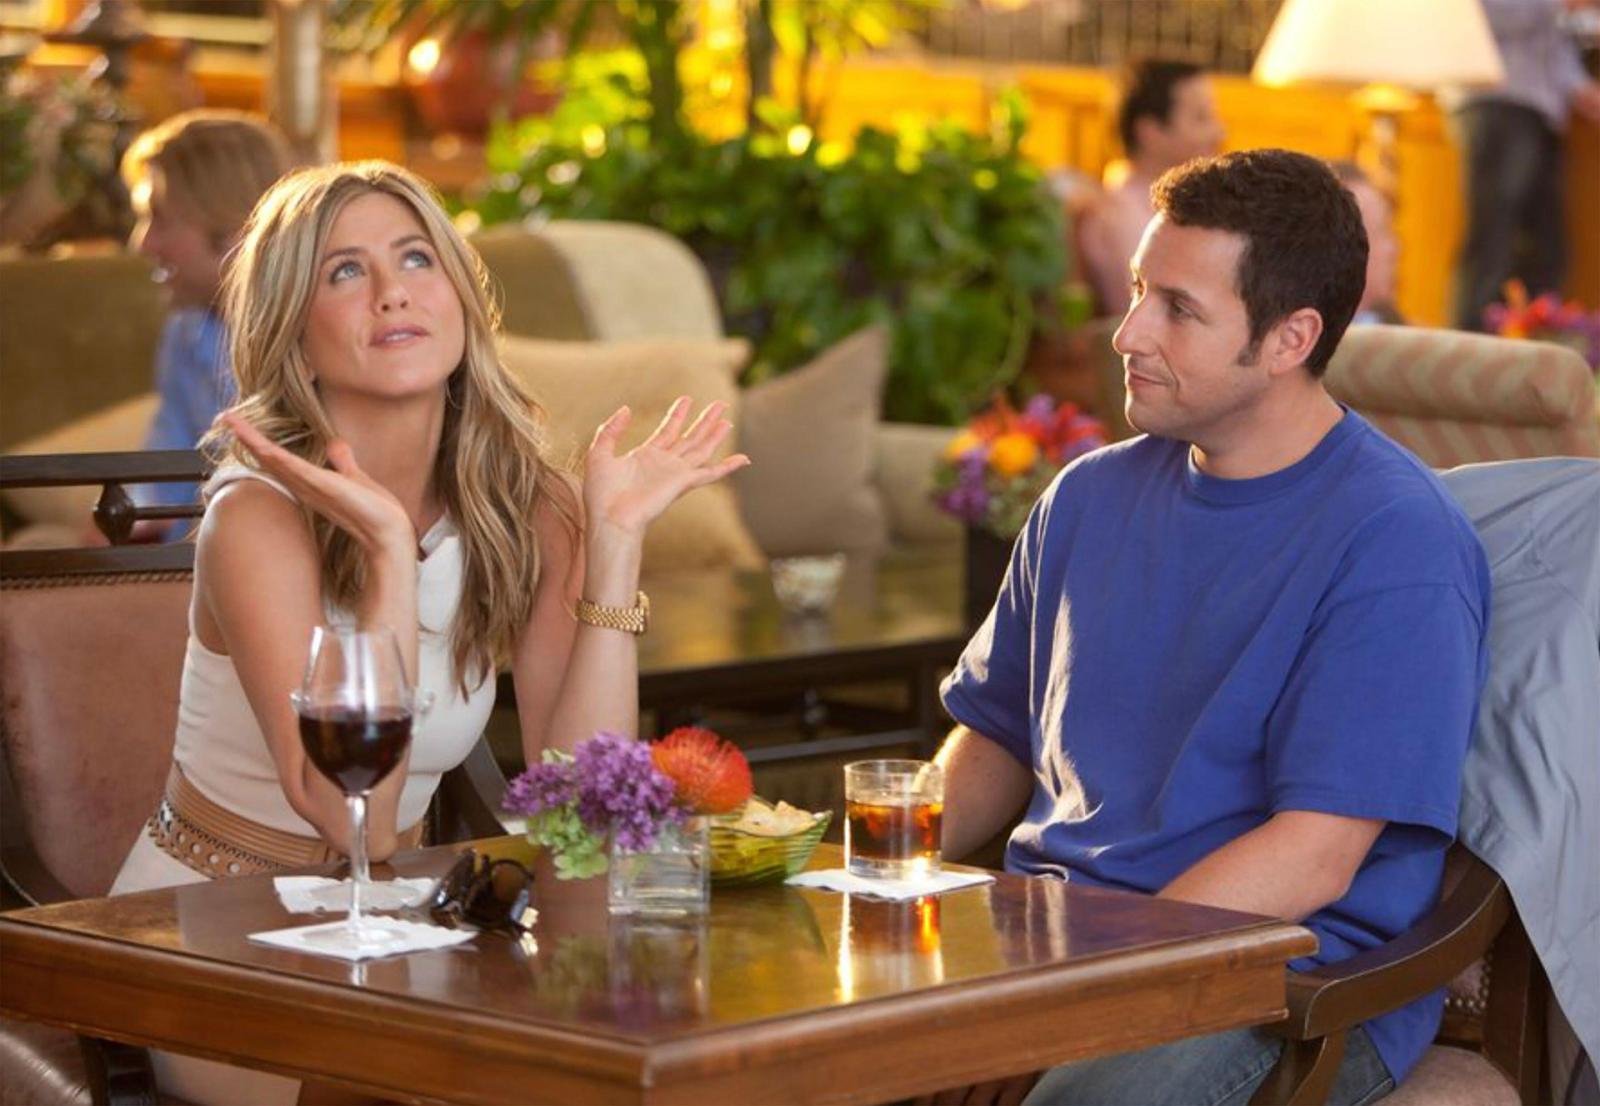 Adam Sandler's Romantic Side: 5 Must-watch Films That Will Make You Laugh and Swoon - image 4